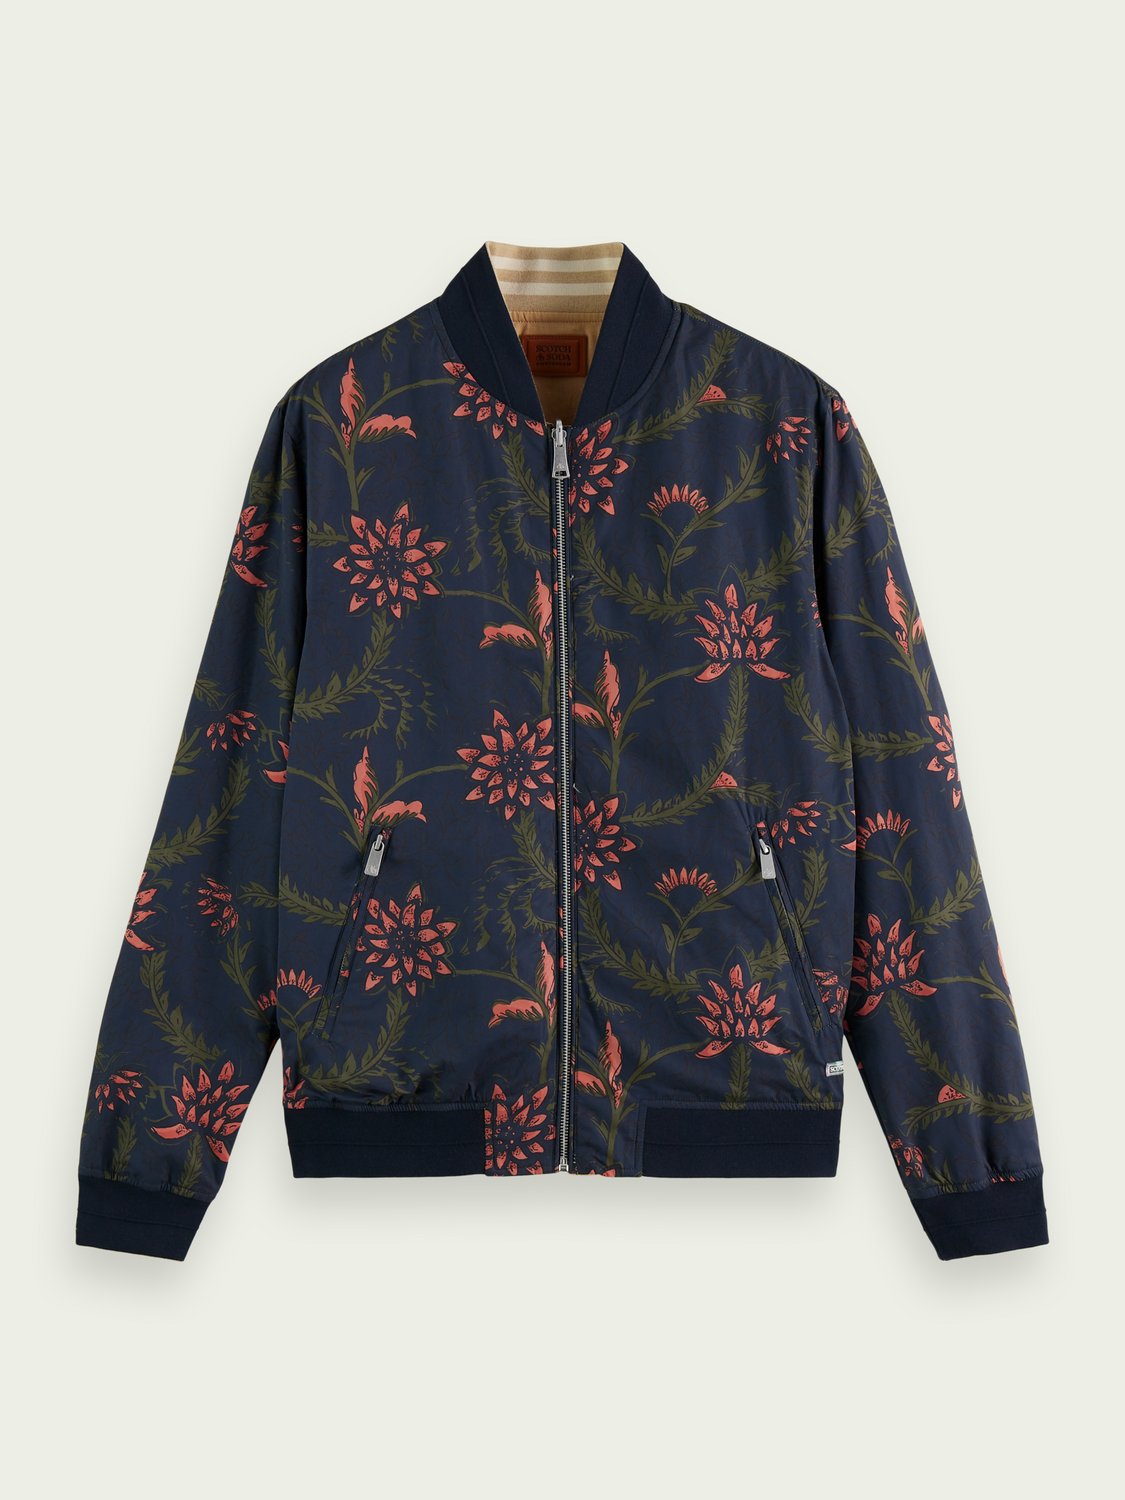 Scotch and Soda | Reversible bomber jacket in Combo A | Scotch Select